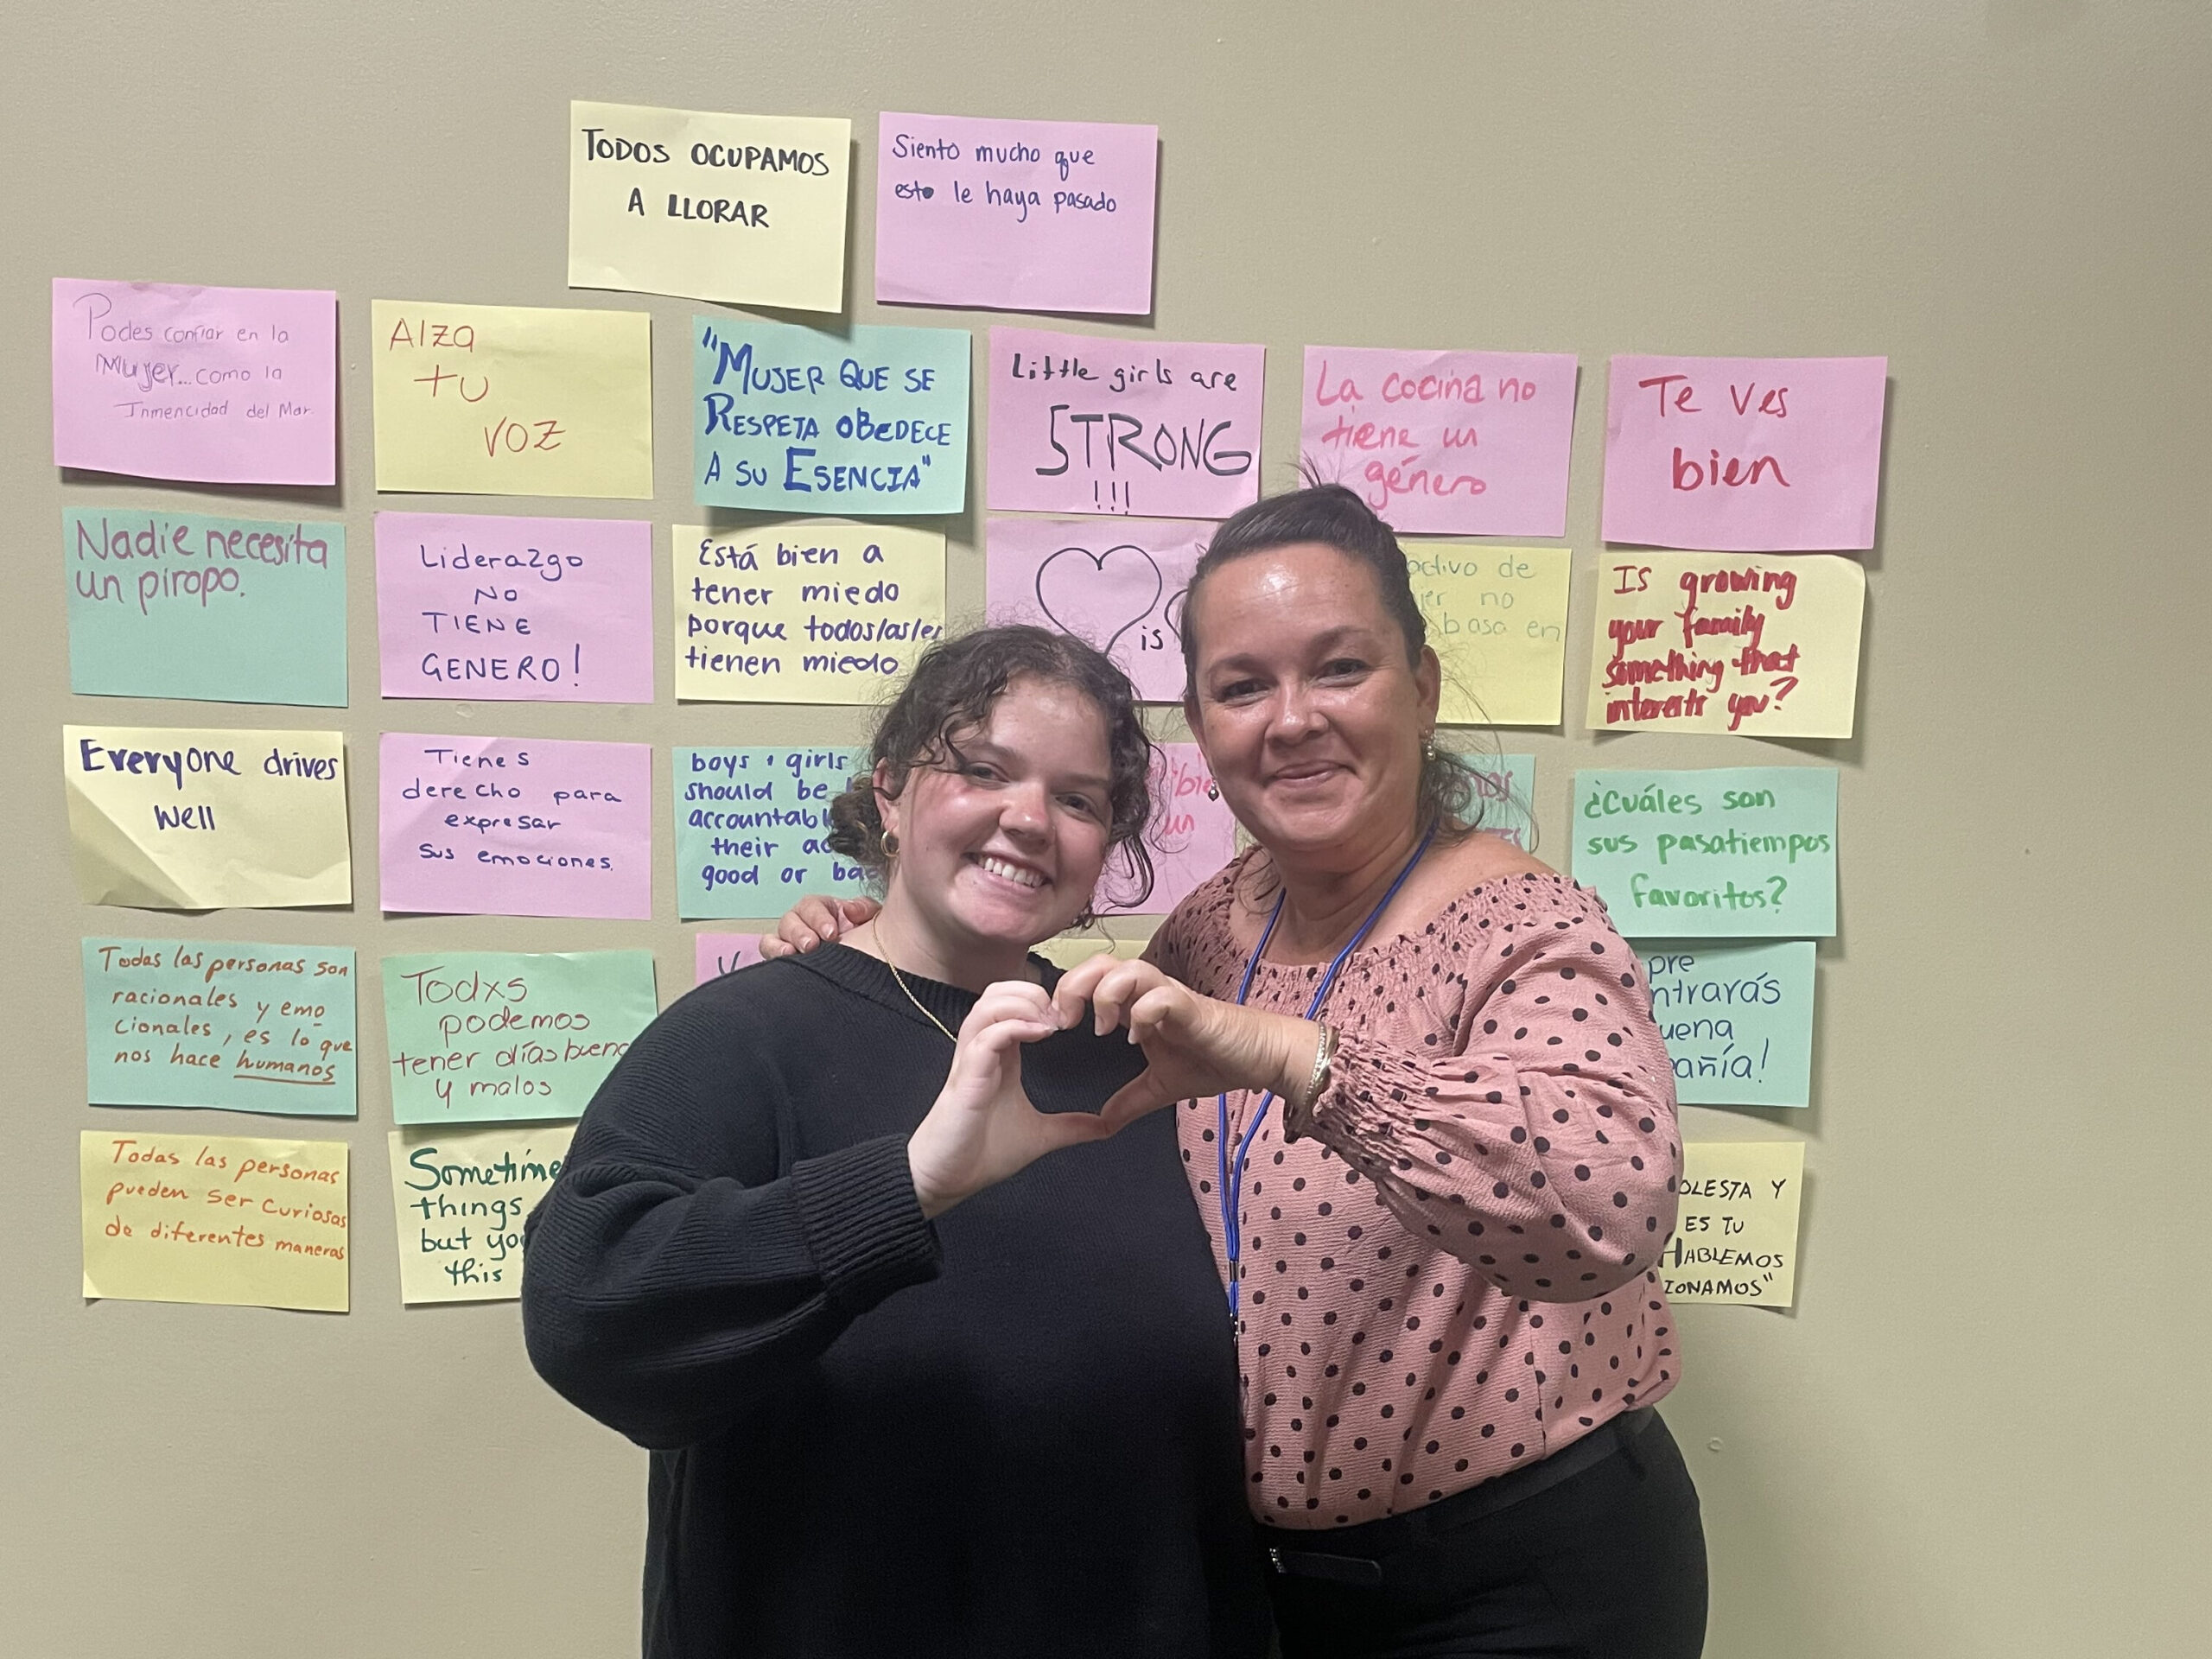 Miya Marwood makes a heart shape with her hands alongside a high school counselor in Costa Rica.